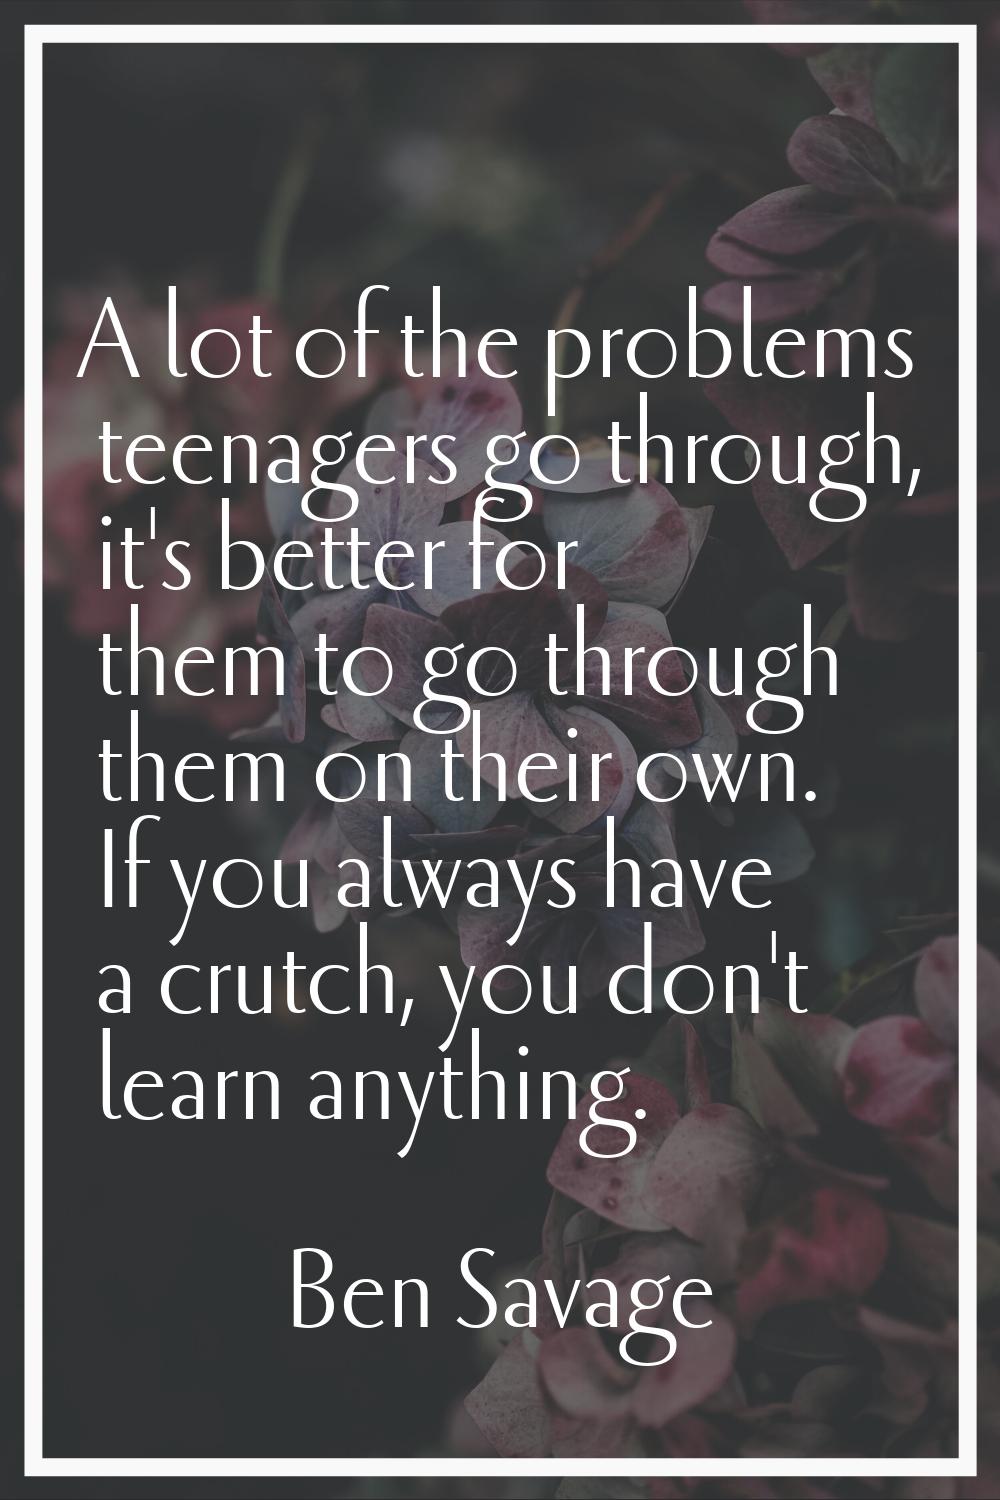 A lot of the problems teenagers go through, it's better for them to go through them on their own. I